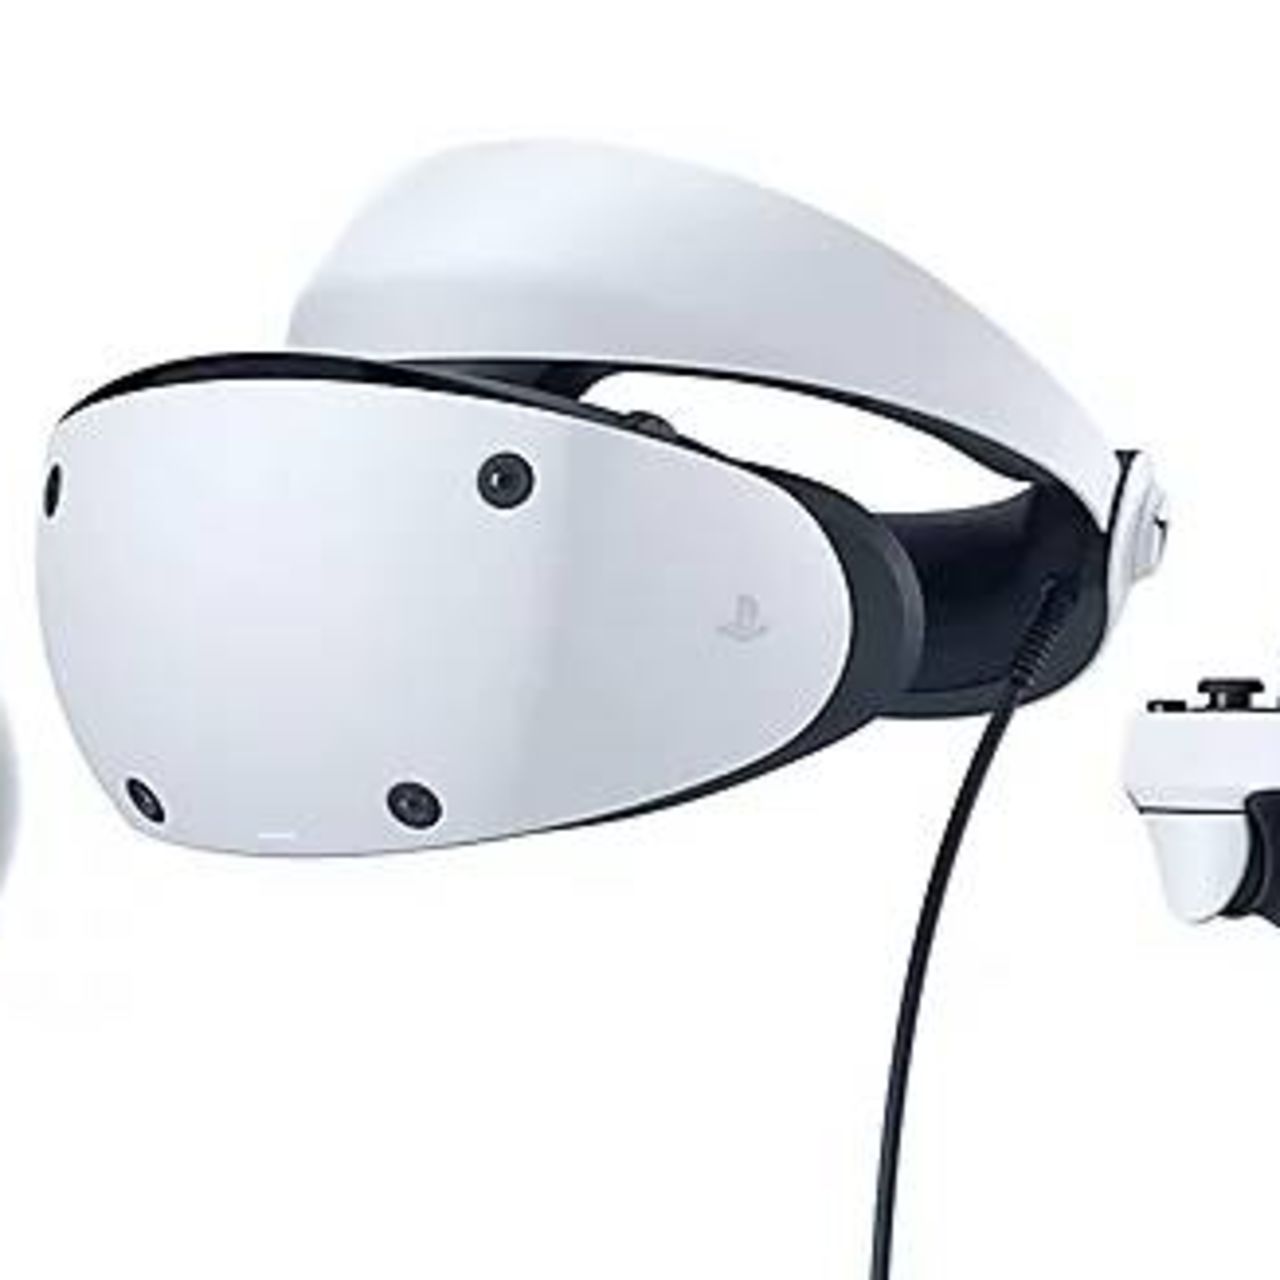 Playstation VR 2 becomes a vivid monitor on some PCs